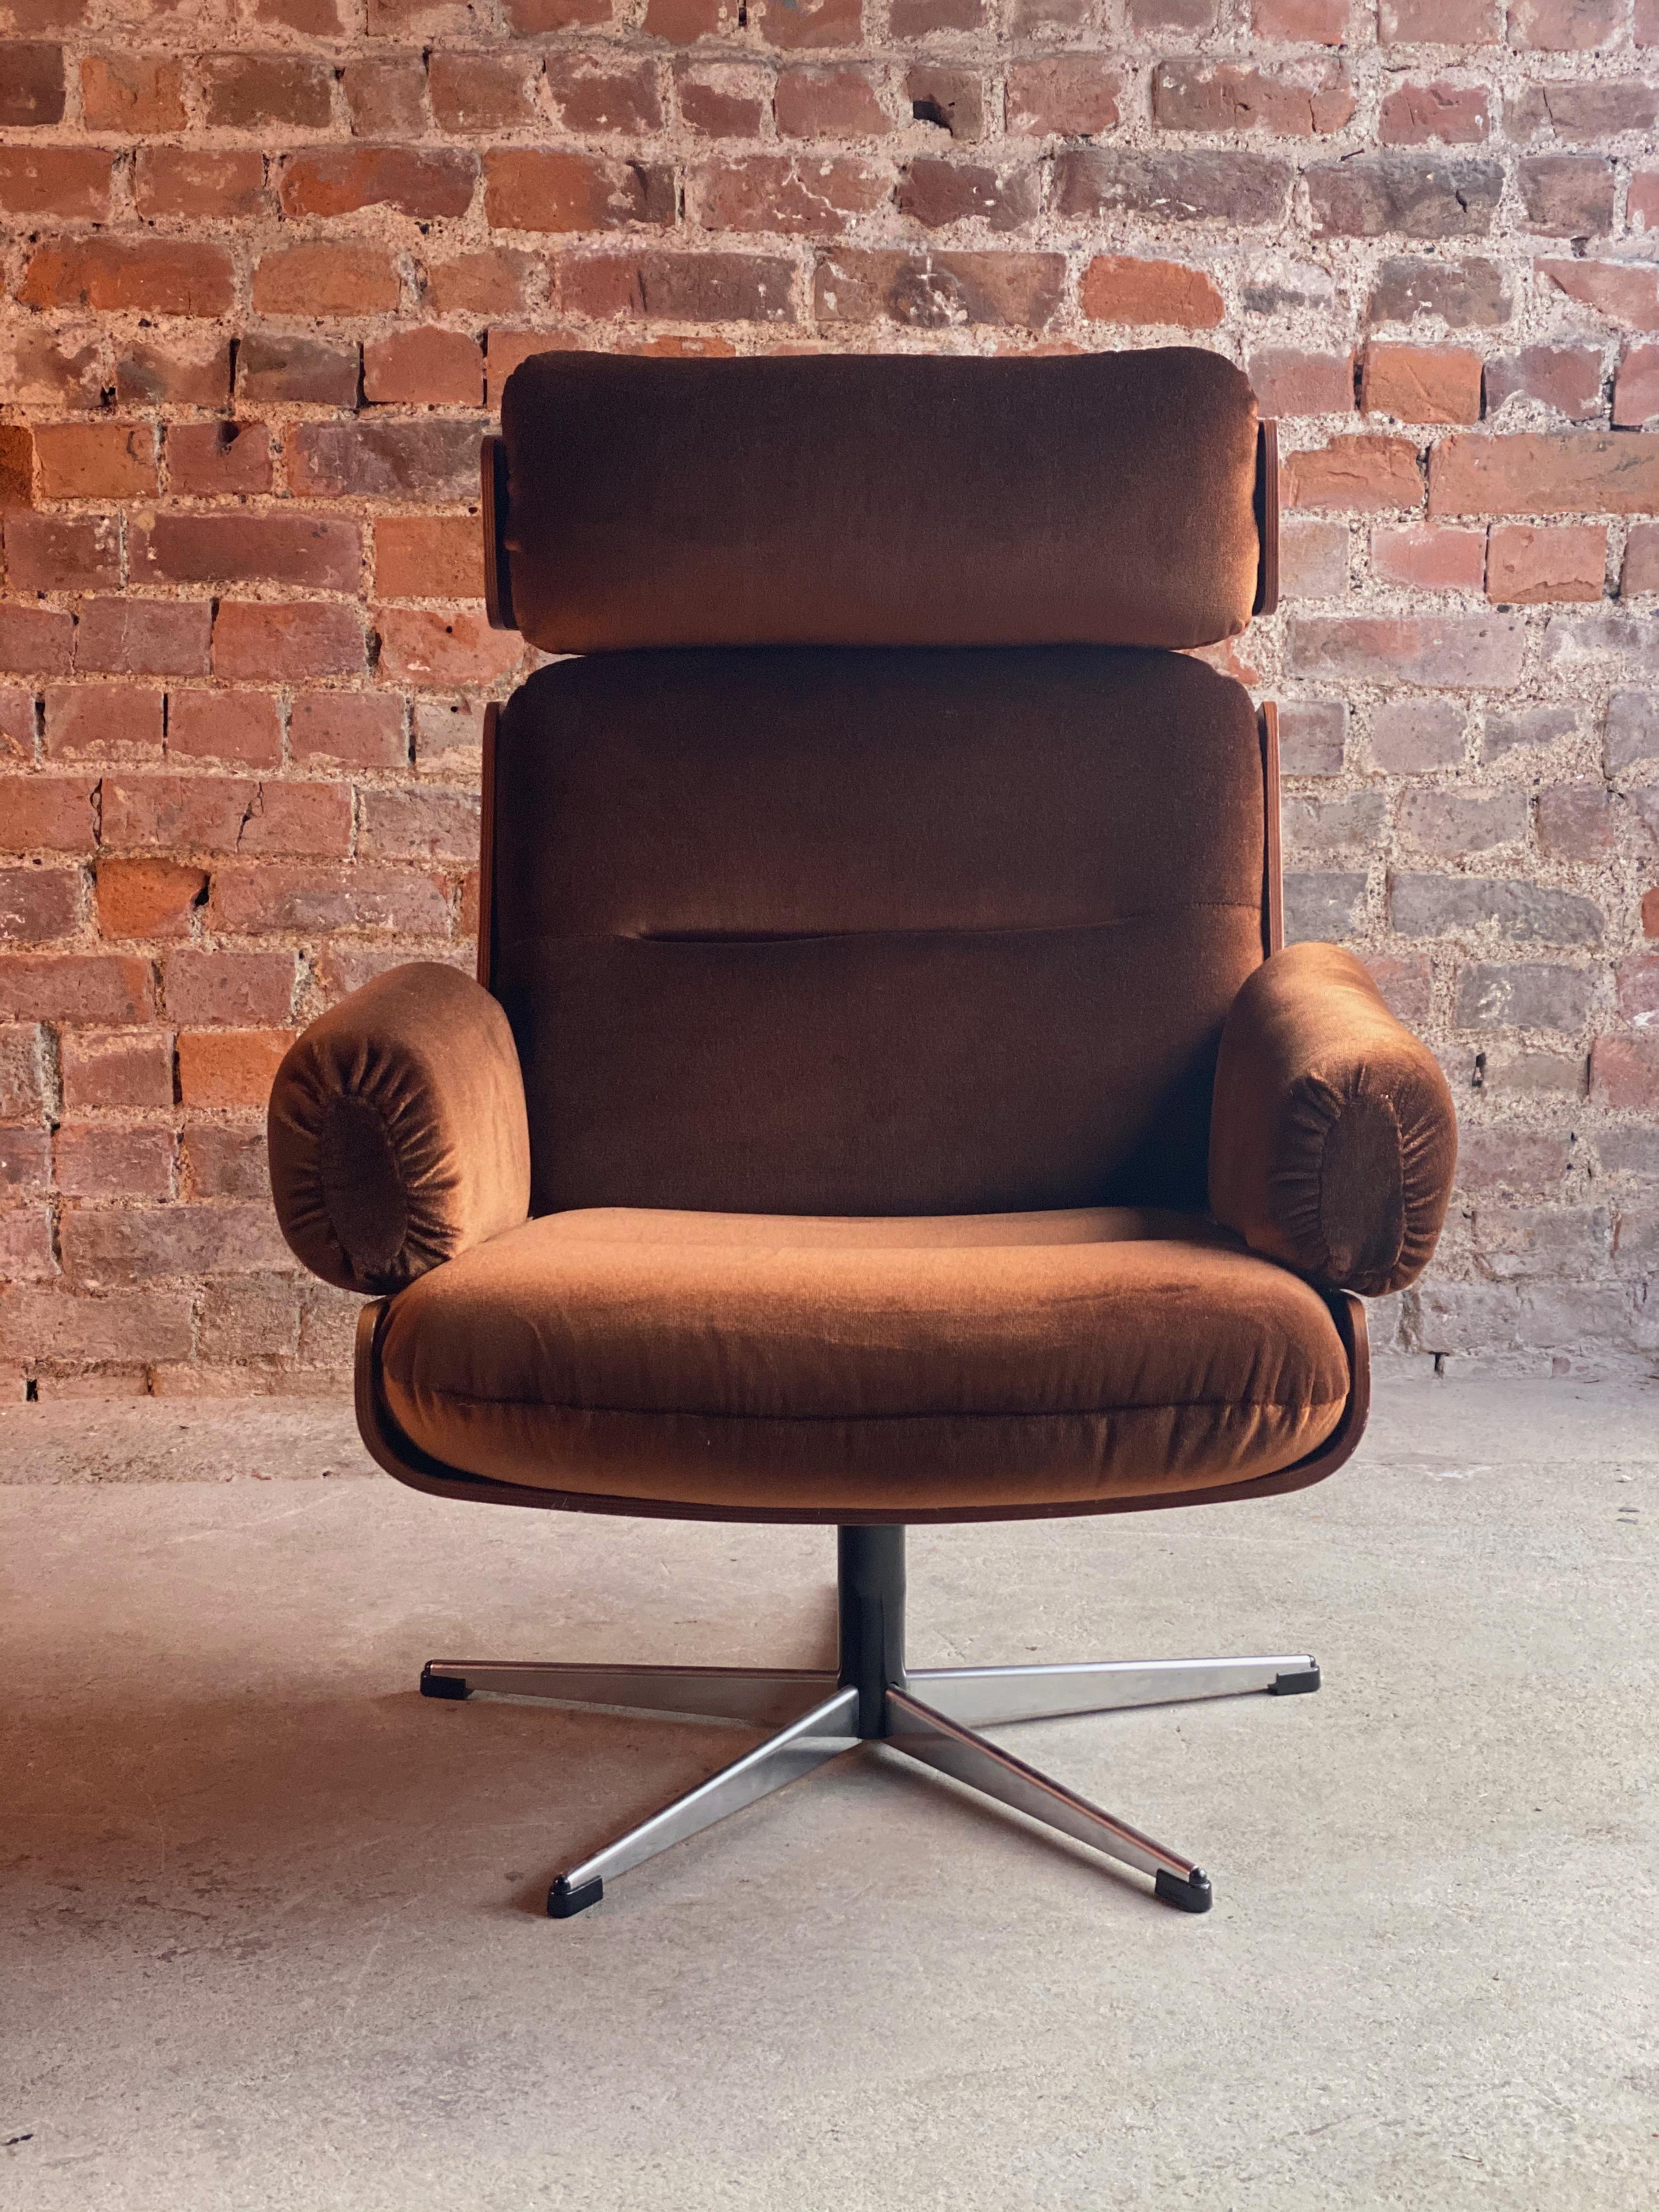 Guy Rogers lounge chair Eames style Mad Men Era midcentury, 1960s

We are delighted to offer this midcentury ‘Mad Men’ era Guy Rogers Teak swivel lounge chair circa 1960s, the lounge chair finished in its original dark brown velour and raised on a